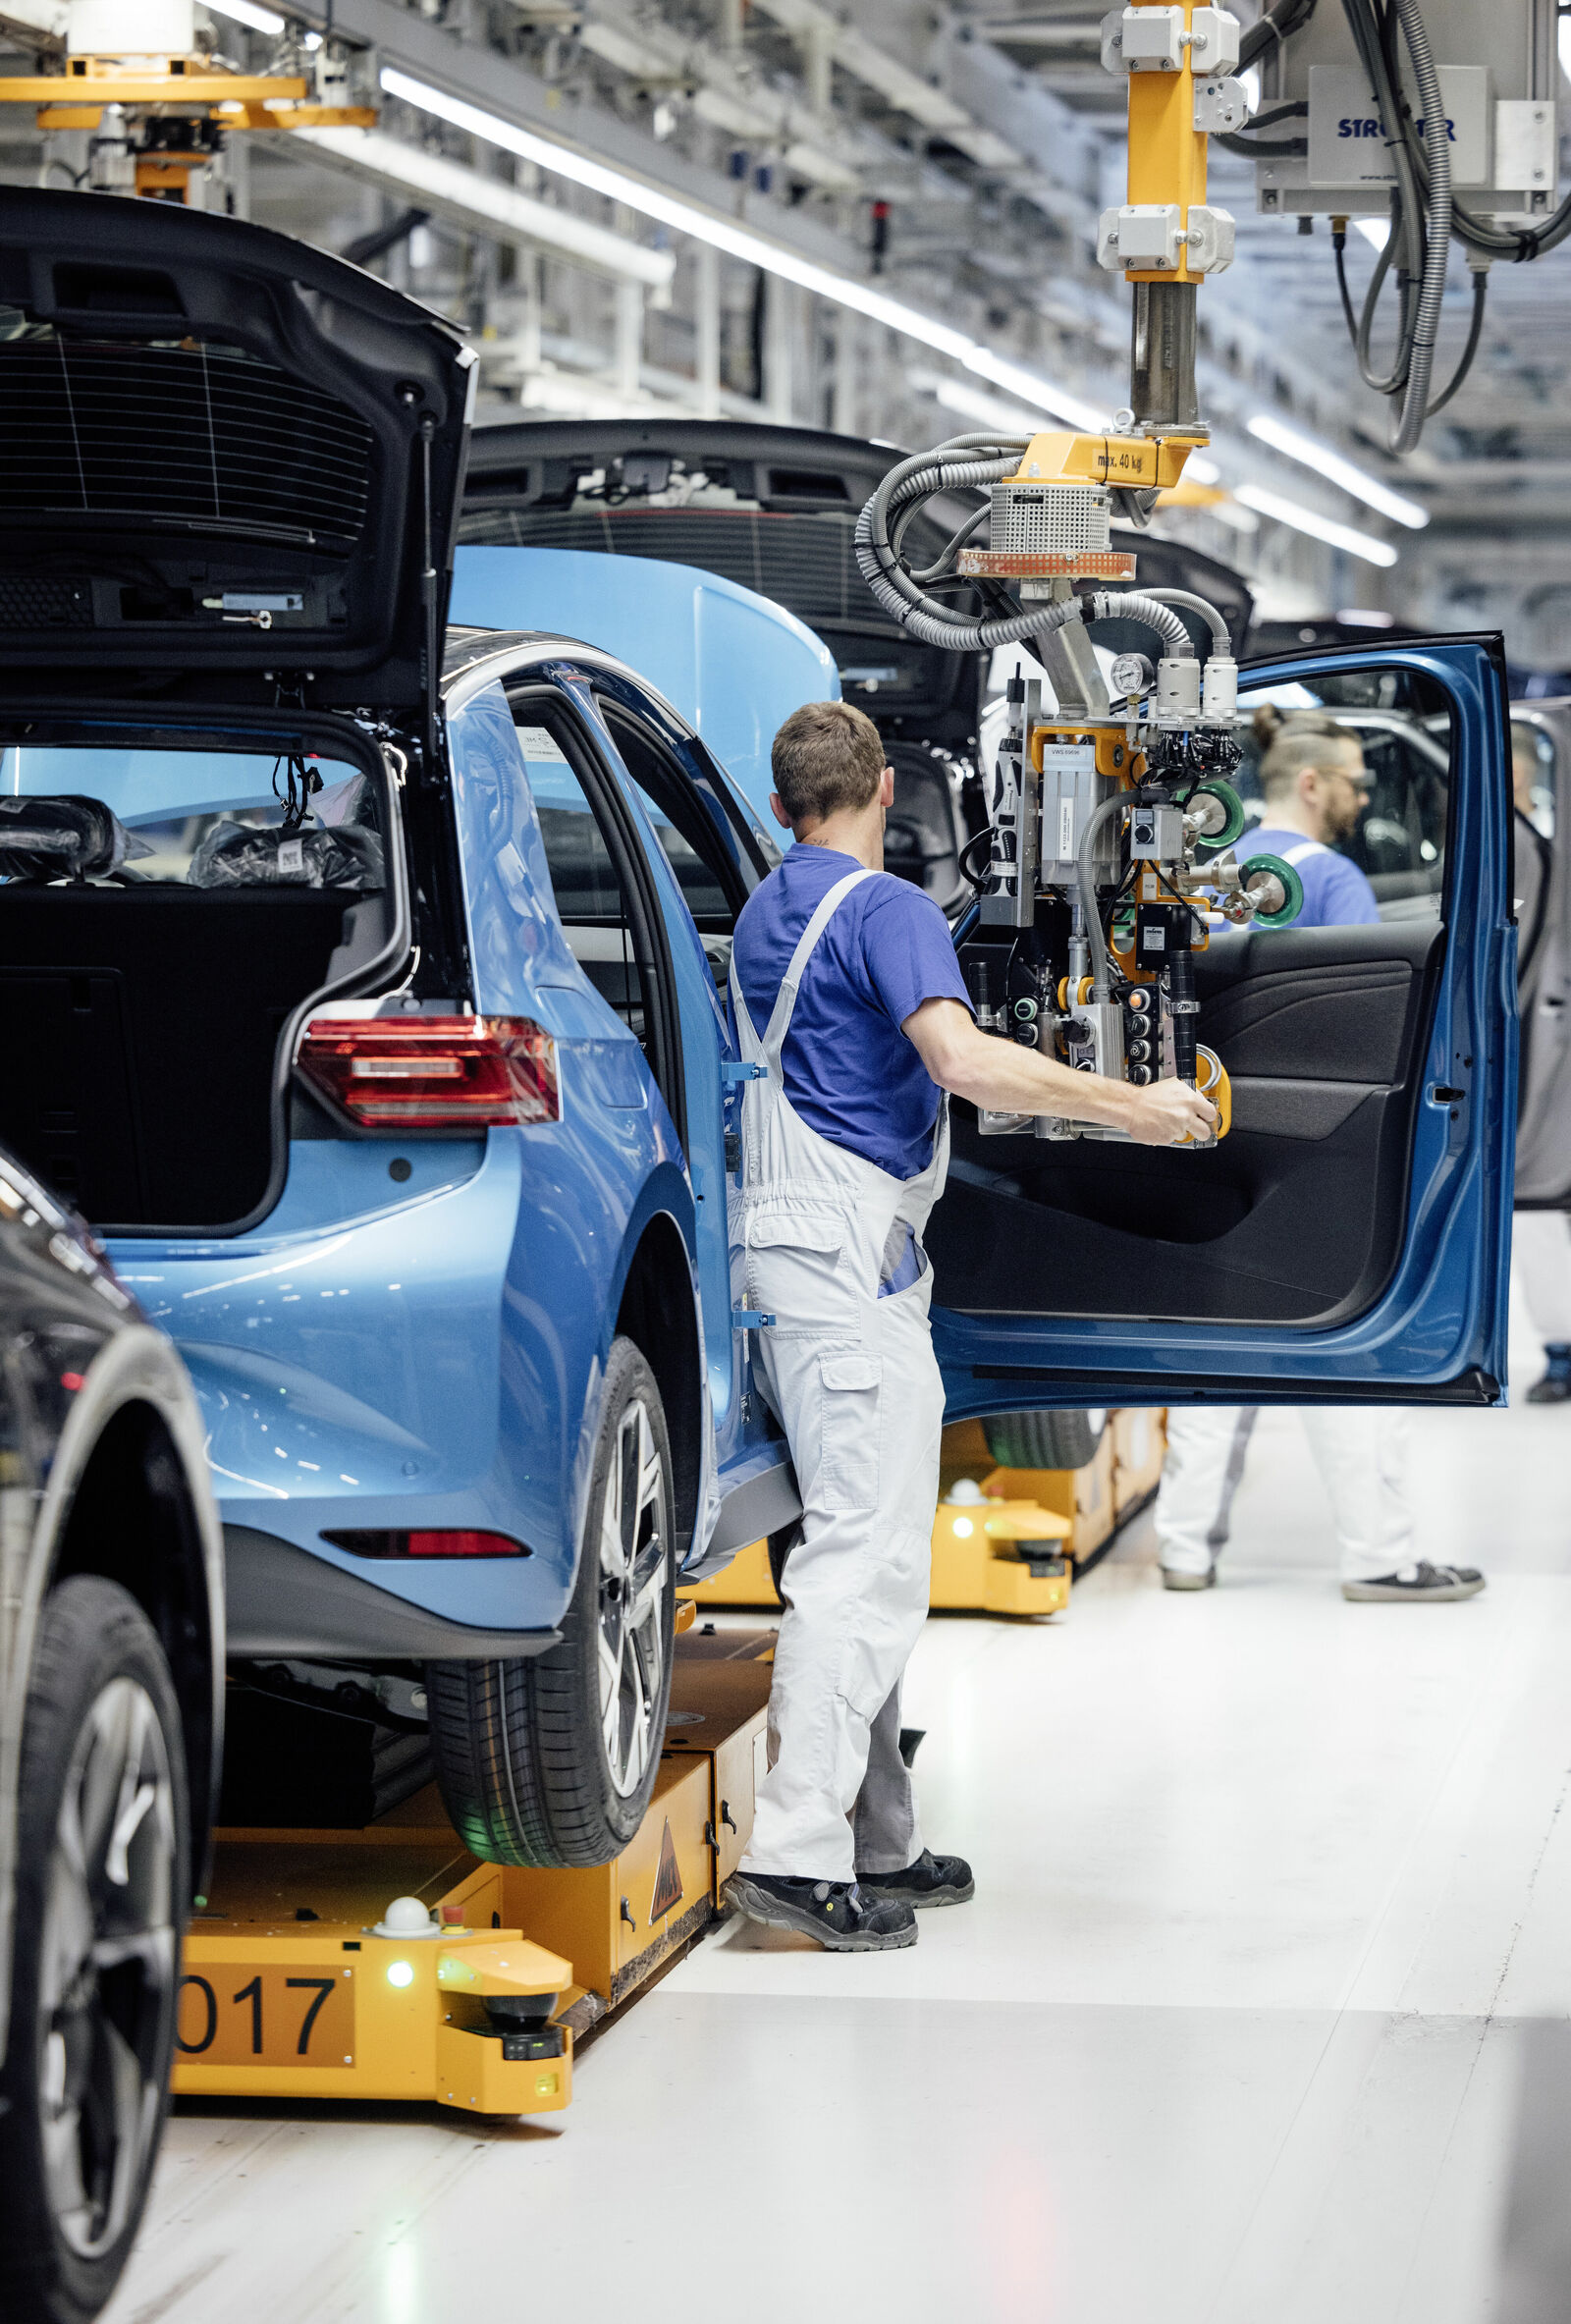 Production of the Volkswagen ID.3 at the Zwickau vehicle plant